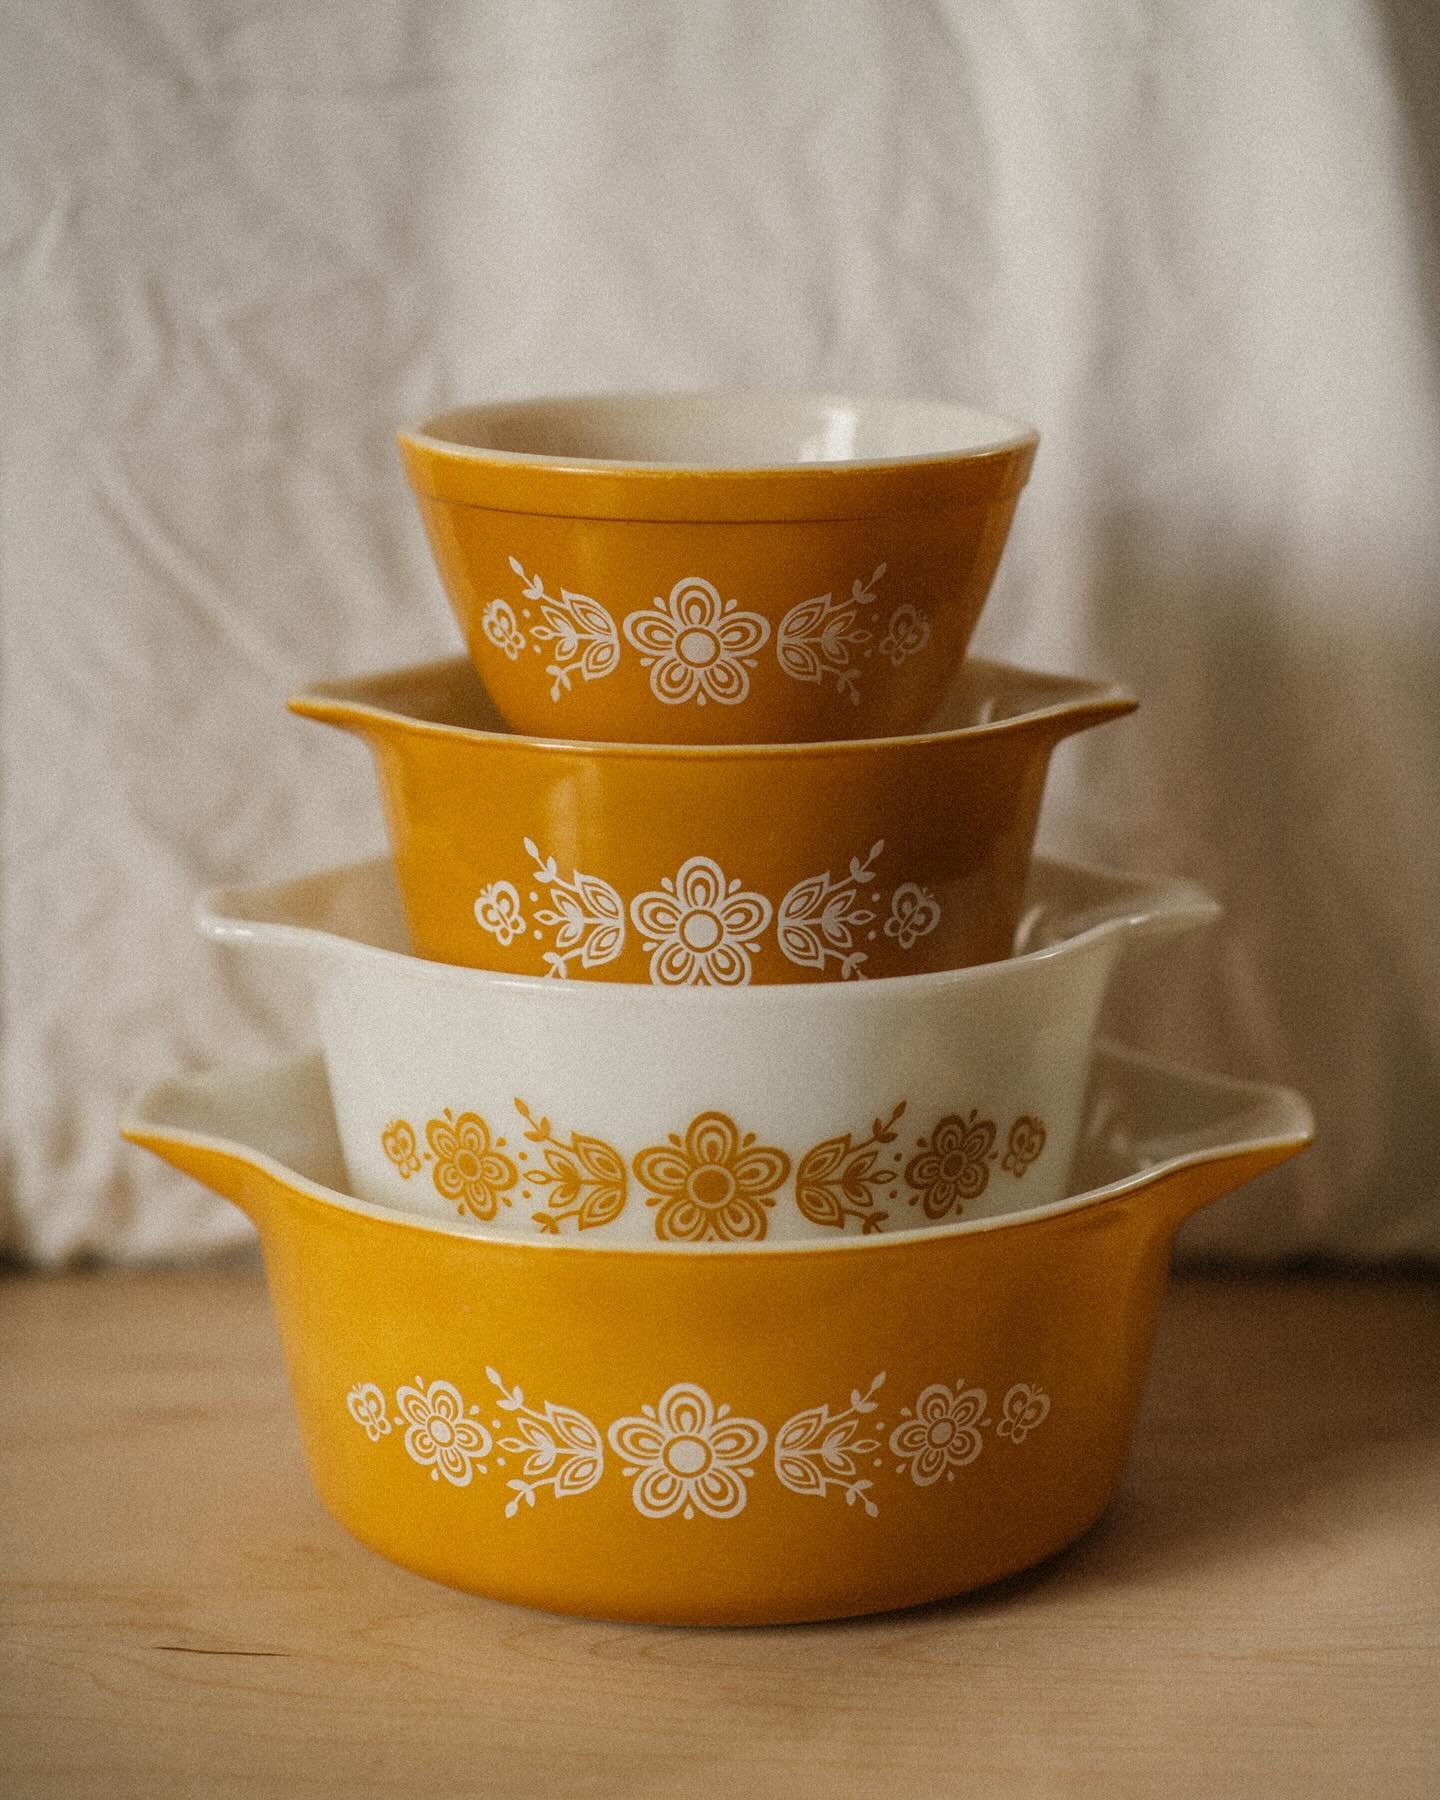 We have a fresh batch of Butterfly Gold Pyrex in the shop! Three casserole dishes and two small mixing bowls are available.

Butterfly Gold is my favorite pattern (I have a Cinderella set and a couple random casserole dishes!)&mdash;it&rsquo;s a perf